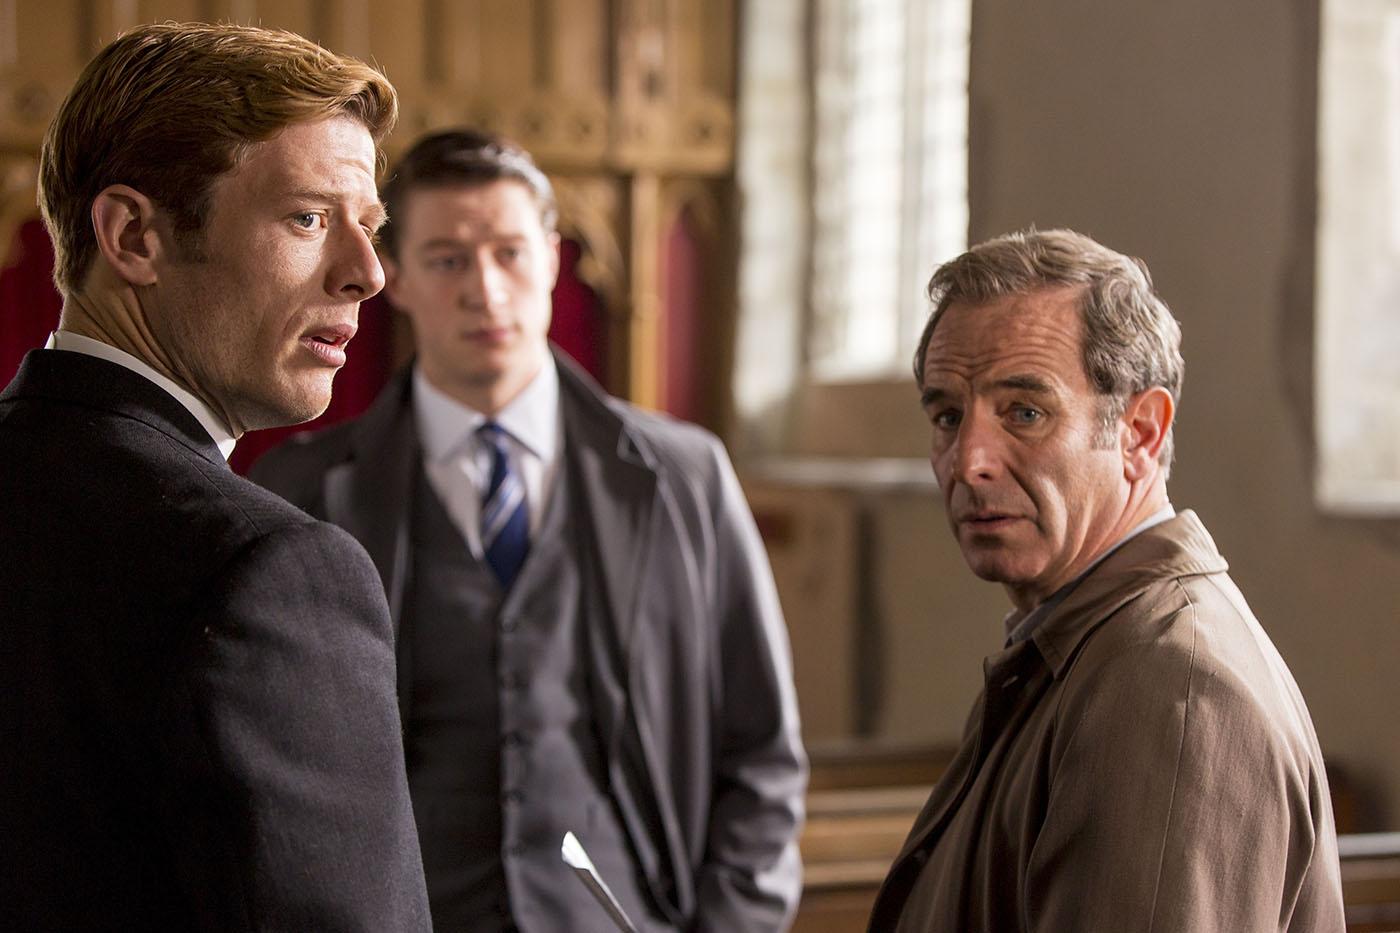 James Norton as Sidney Chambers, Lorne MacFadyen as Phil Wilkinson and Robson Green as Geordie Keating in Grantchester. Photo: Colin Hutton and Kudos/ITV for MASTERPIECE